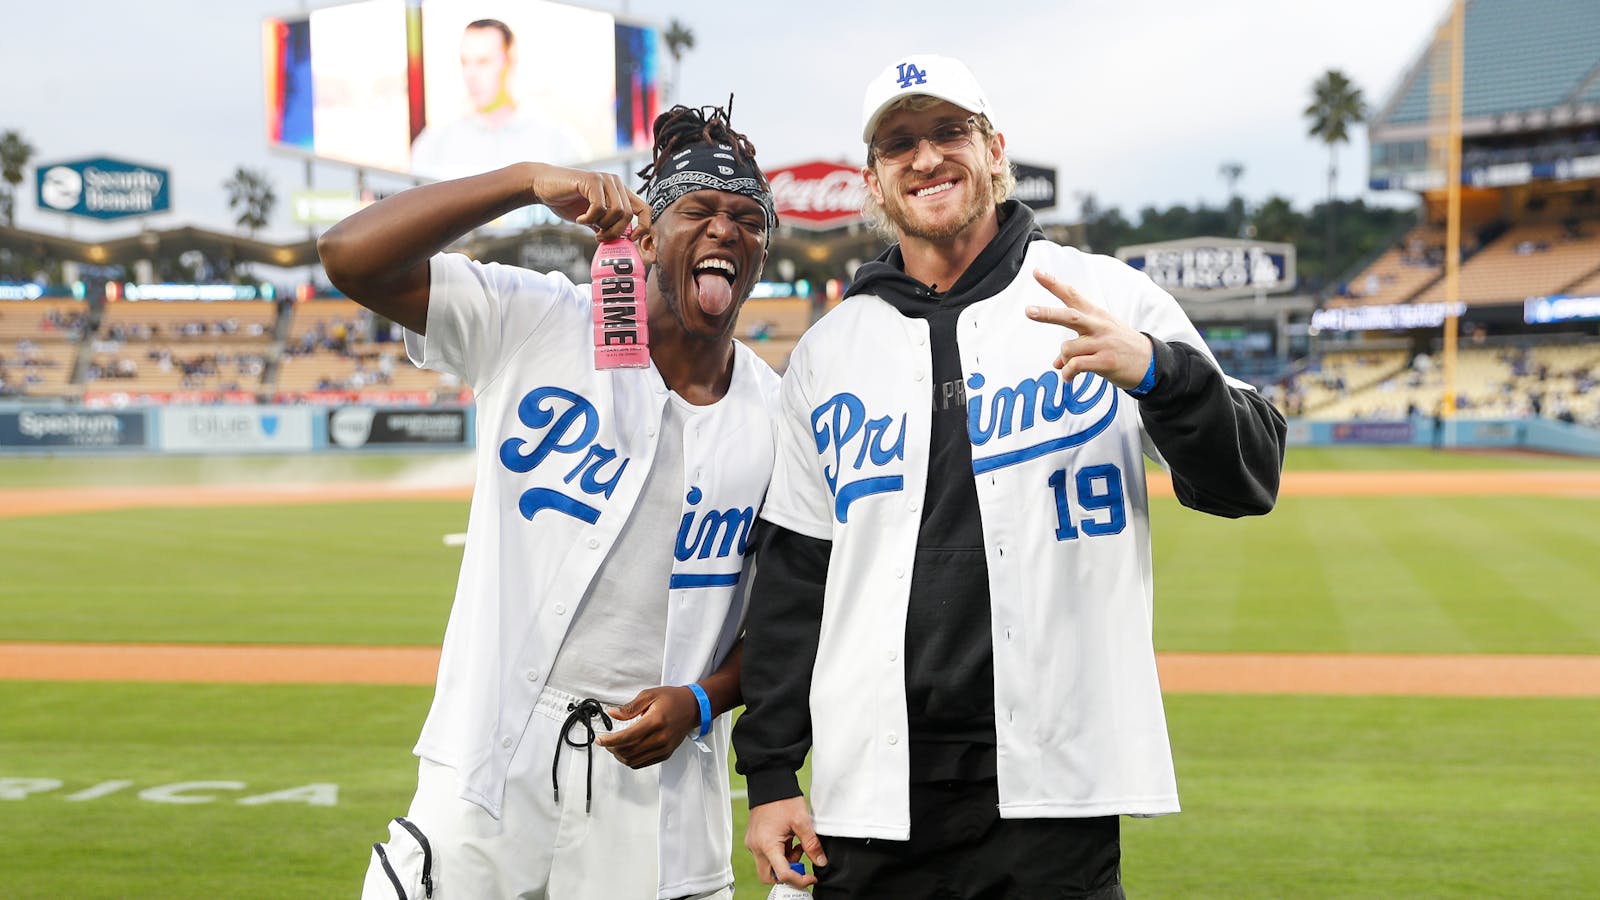 Logan Paul and KSI pose with Prime Hydration bottles at Dodger Stadium in Los Angeles, Calif. Photo by Getty.